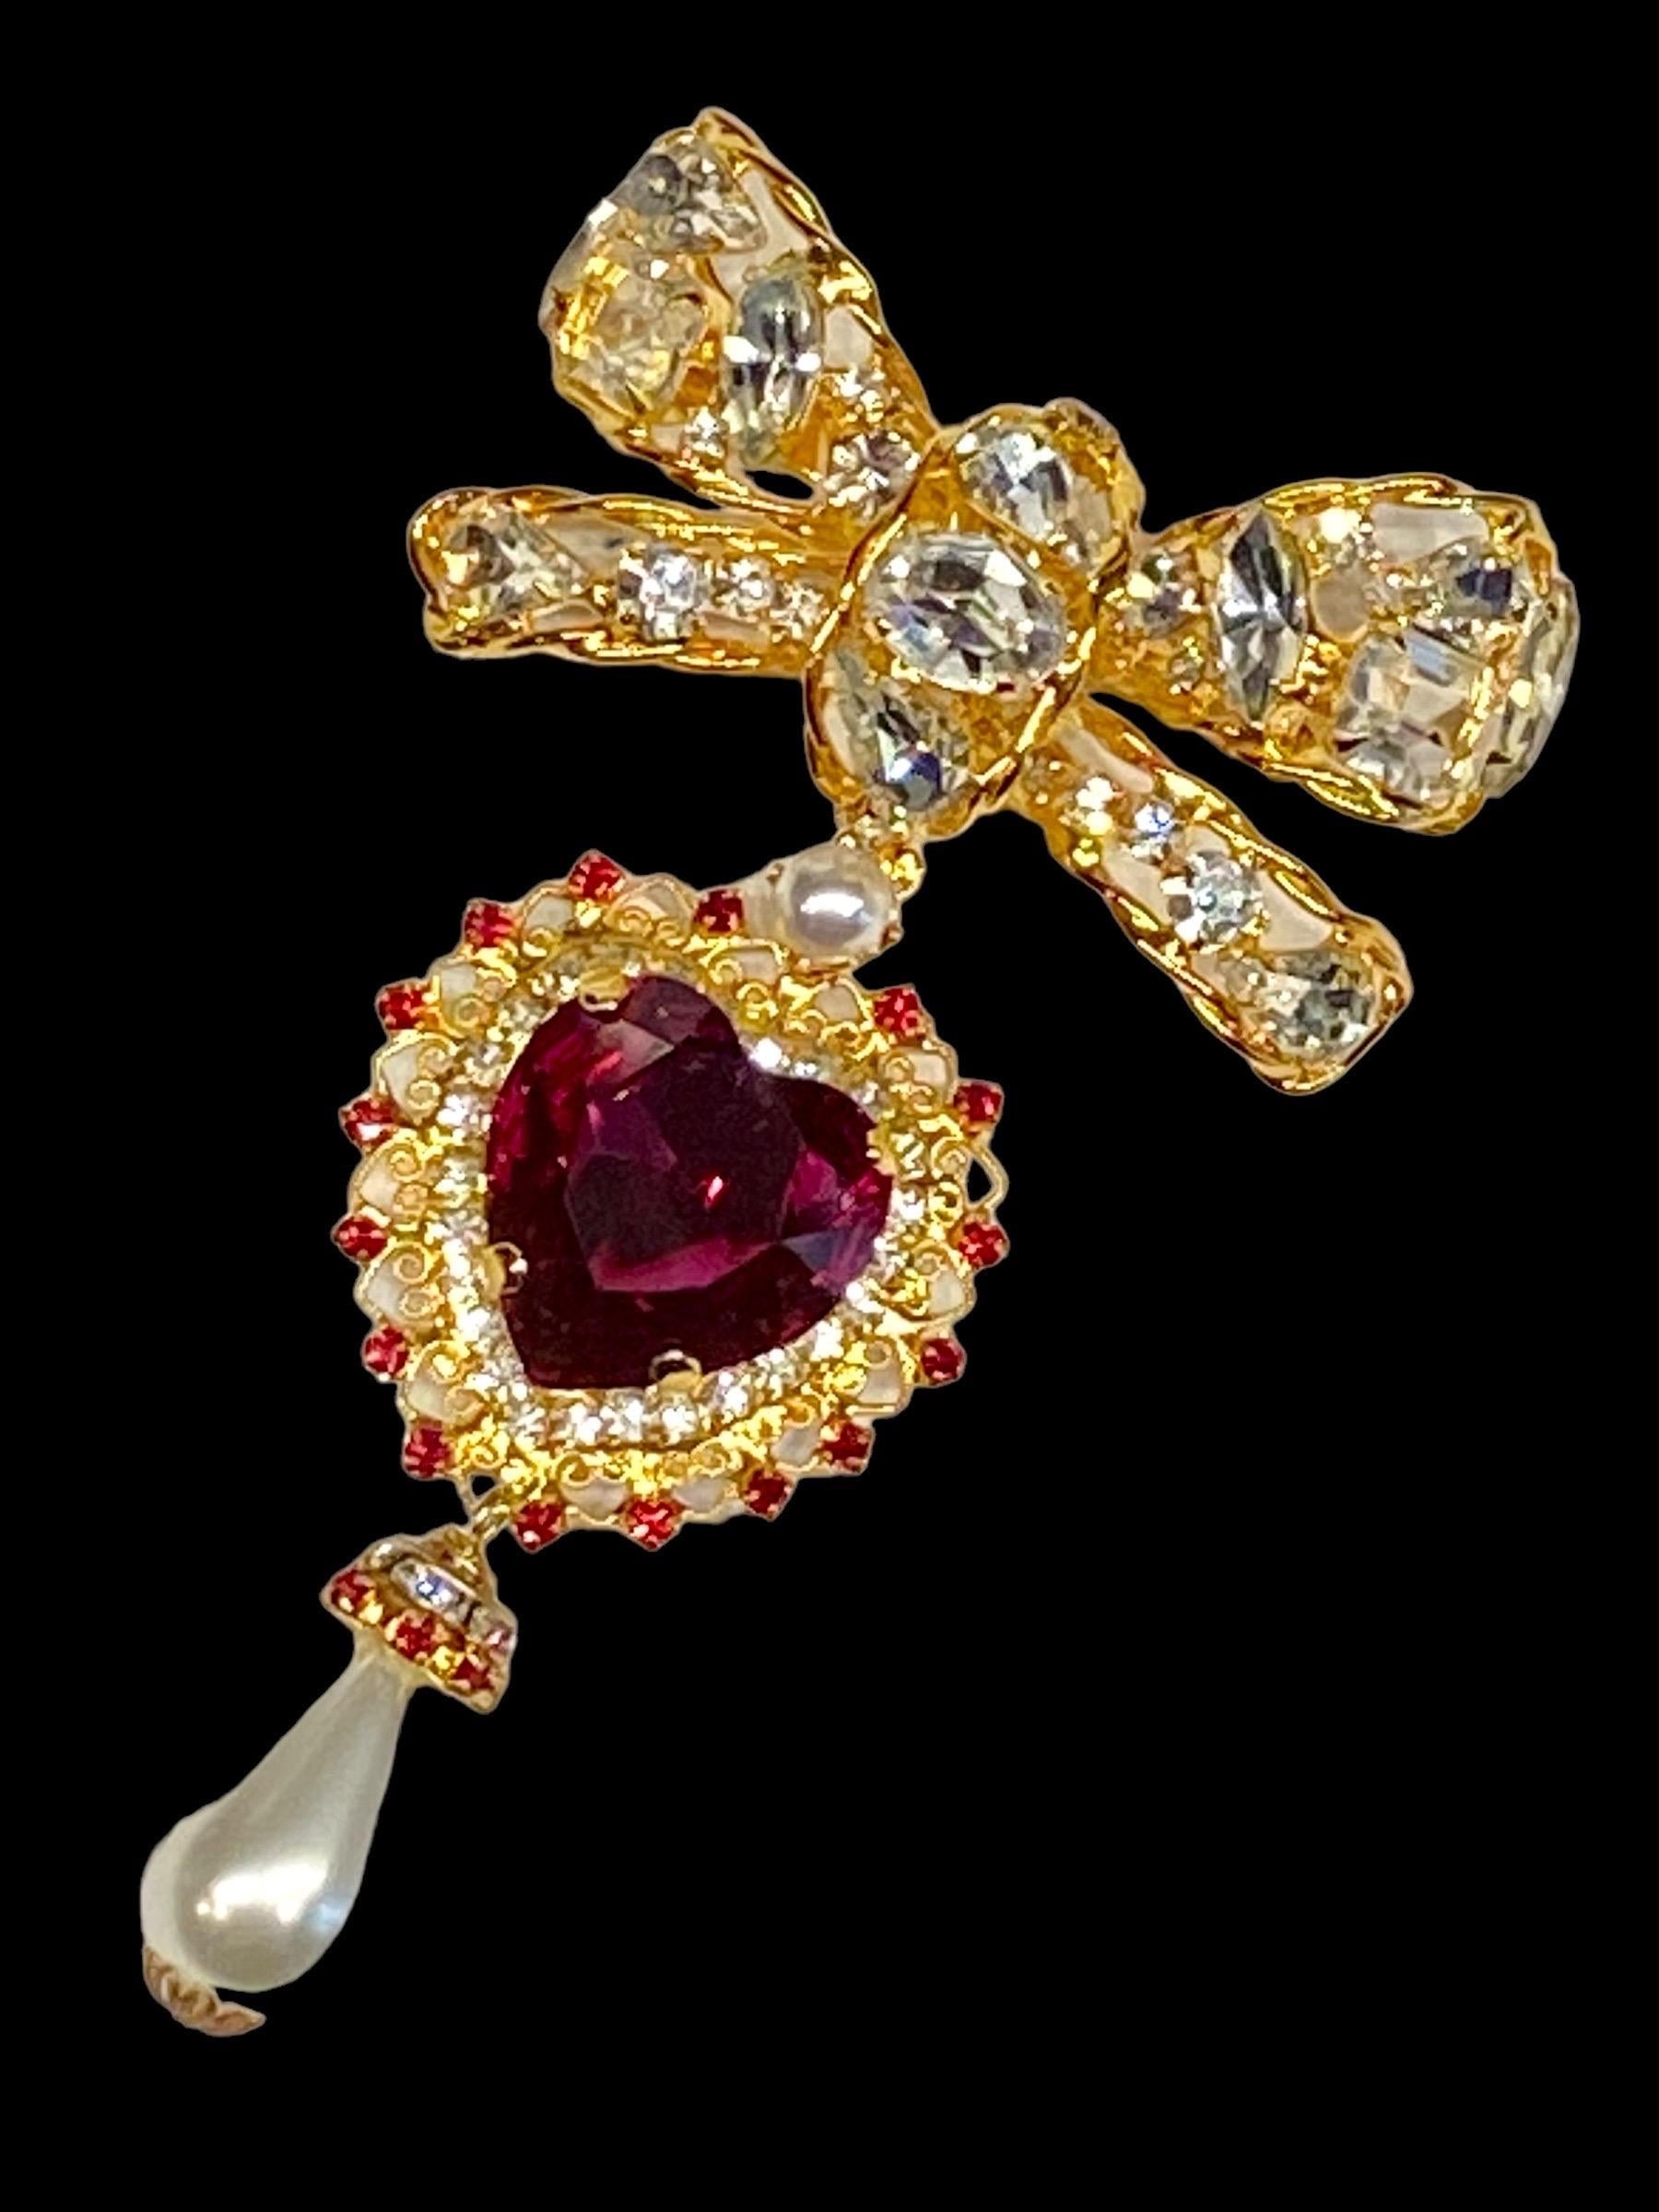 This brooch is a stunning statement piece, perfect for adding a touch of glamour to any outfit. It is comprised of three parts and measures a total of 5